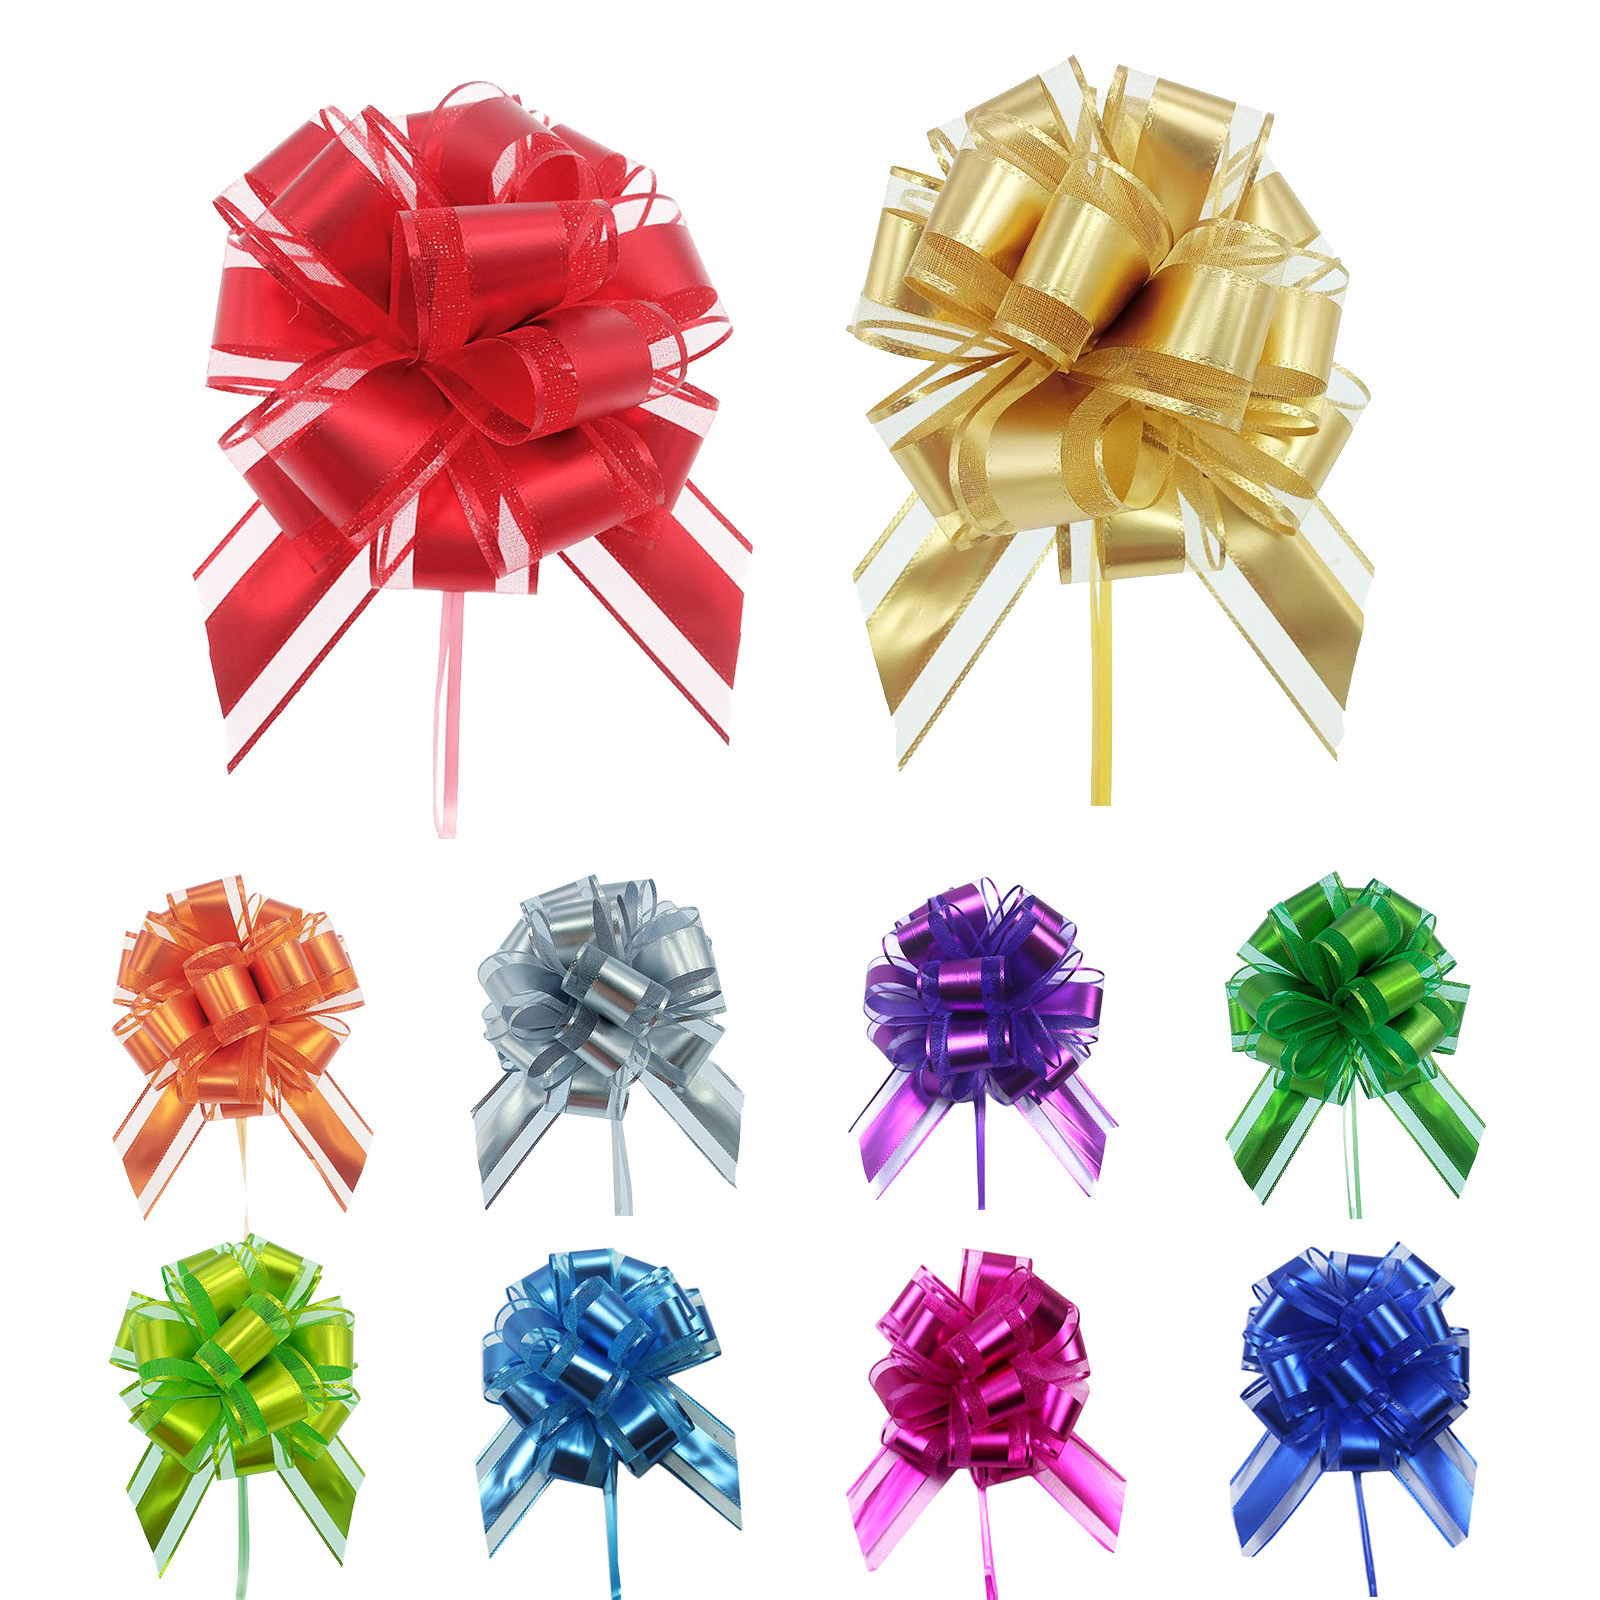 Gift wrapping pull string ribbon bows for bag or box decoration